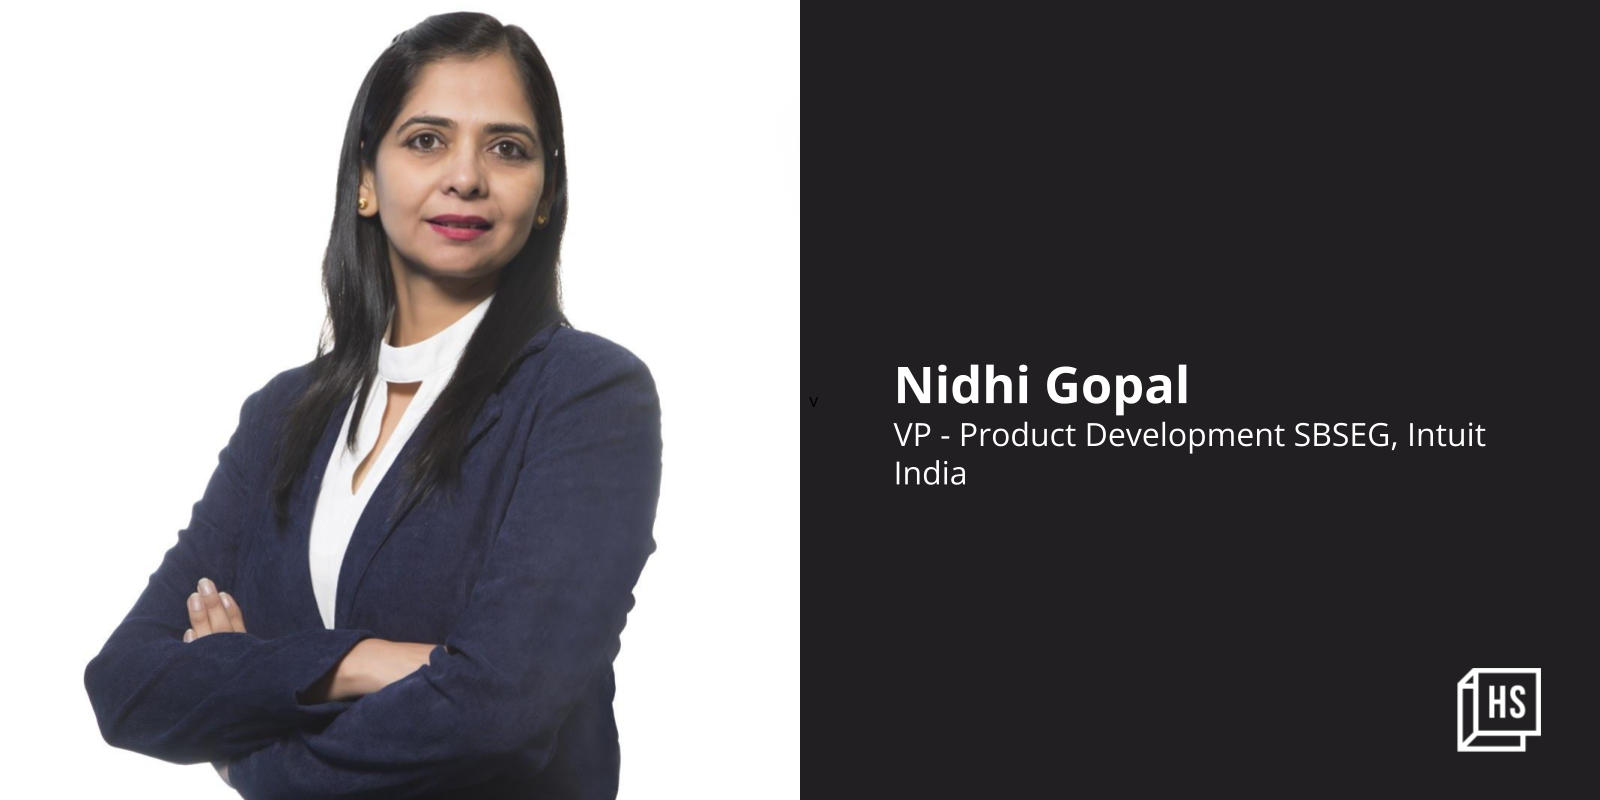 How can women succeed in tech? Intuit's Nidhi Gopal believes in speaking up